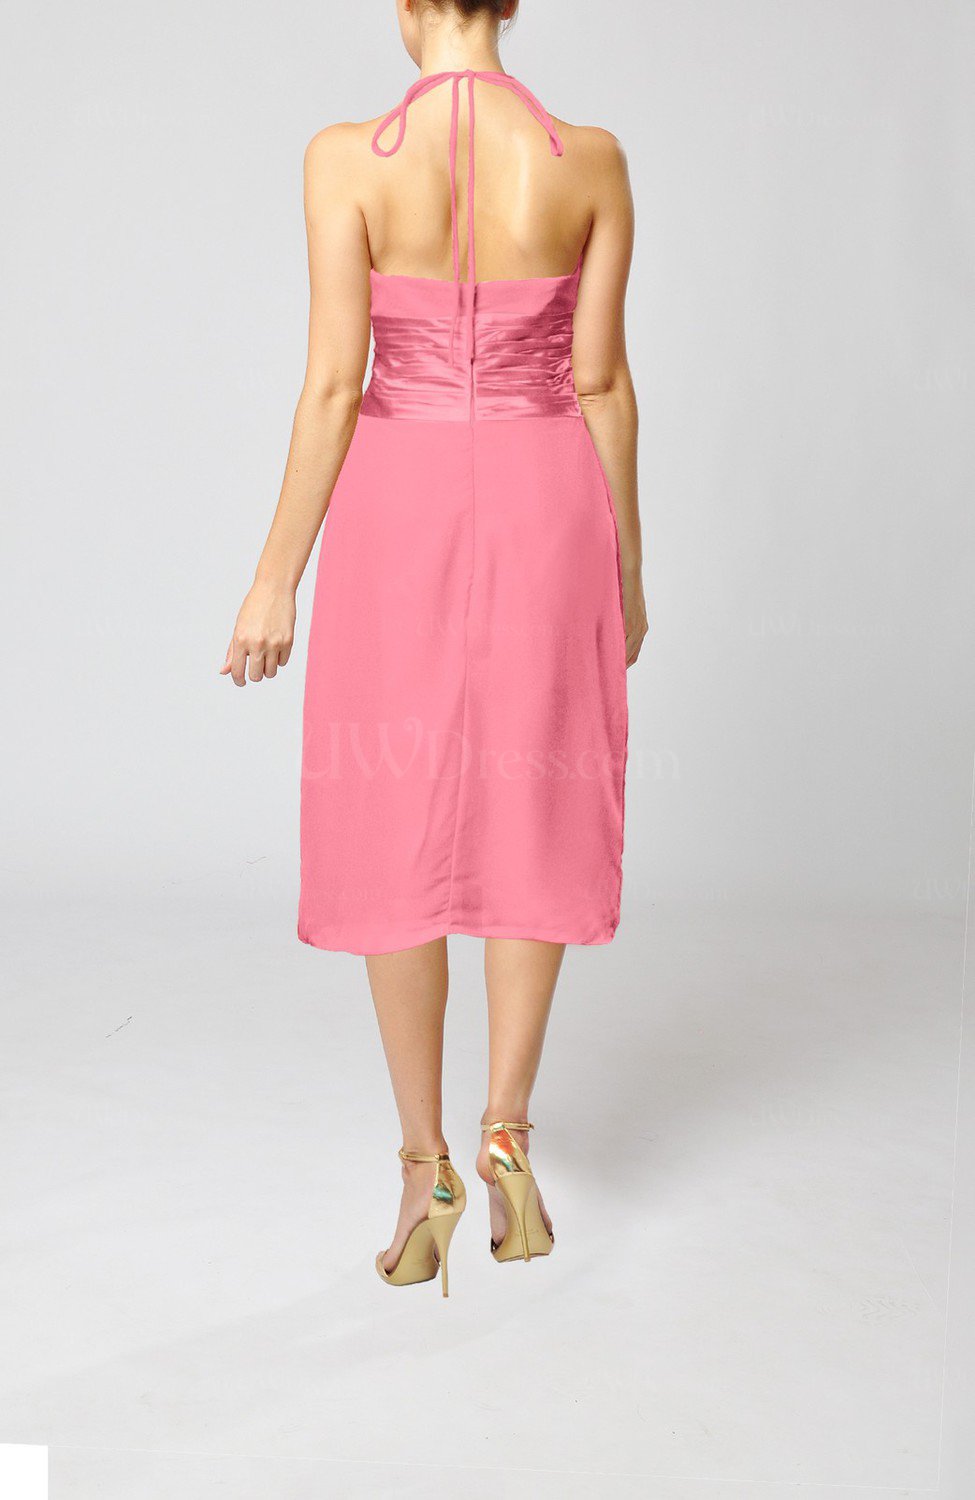 Pink Simple Halter Backless Chiffon Knee Length Cocktail Dresses